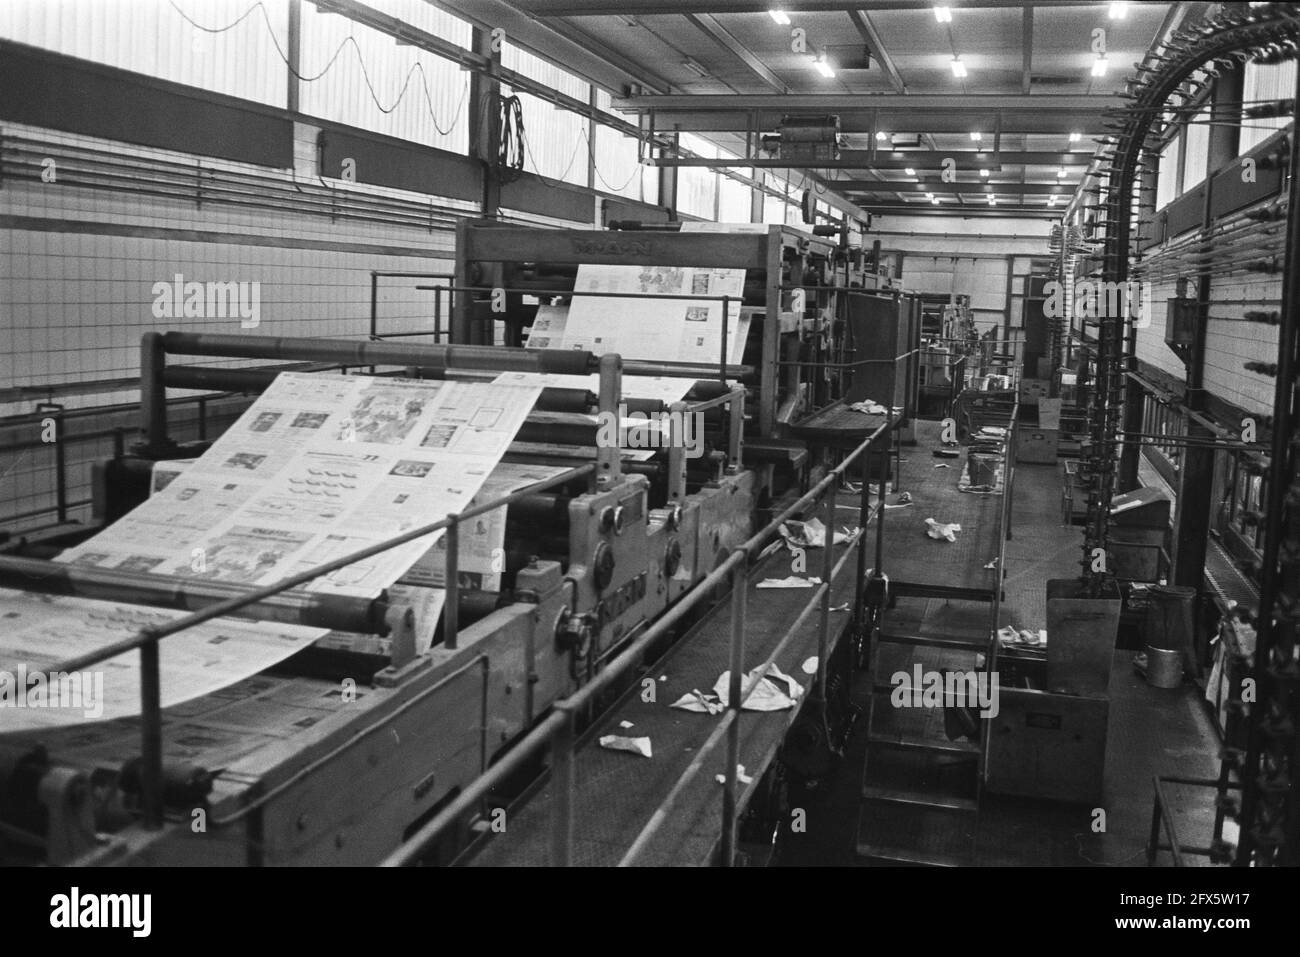 Graphic arts personnel at Van der Loeff in Enschede on strike; stationary rotary presses, February 8, 1977, ROTATION PRESS, strikes, The Netherlands, 20th century press agency photo, news to remember, documentary, historic photography 1945-1990, visual stories, human history of the Twentieth Century, capturing moments in time Stock Photo